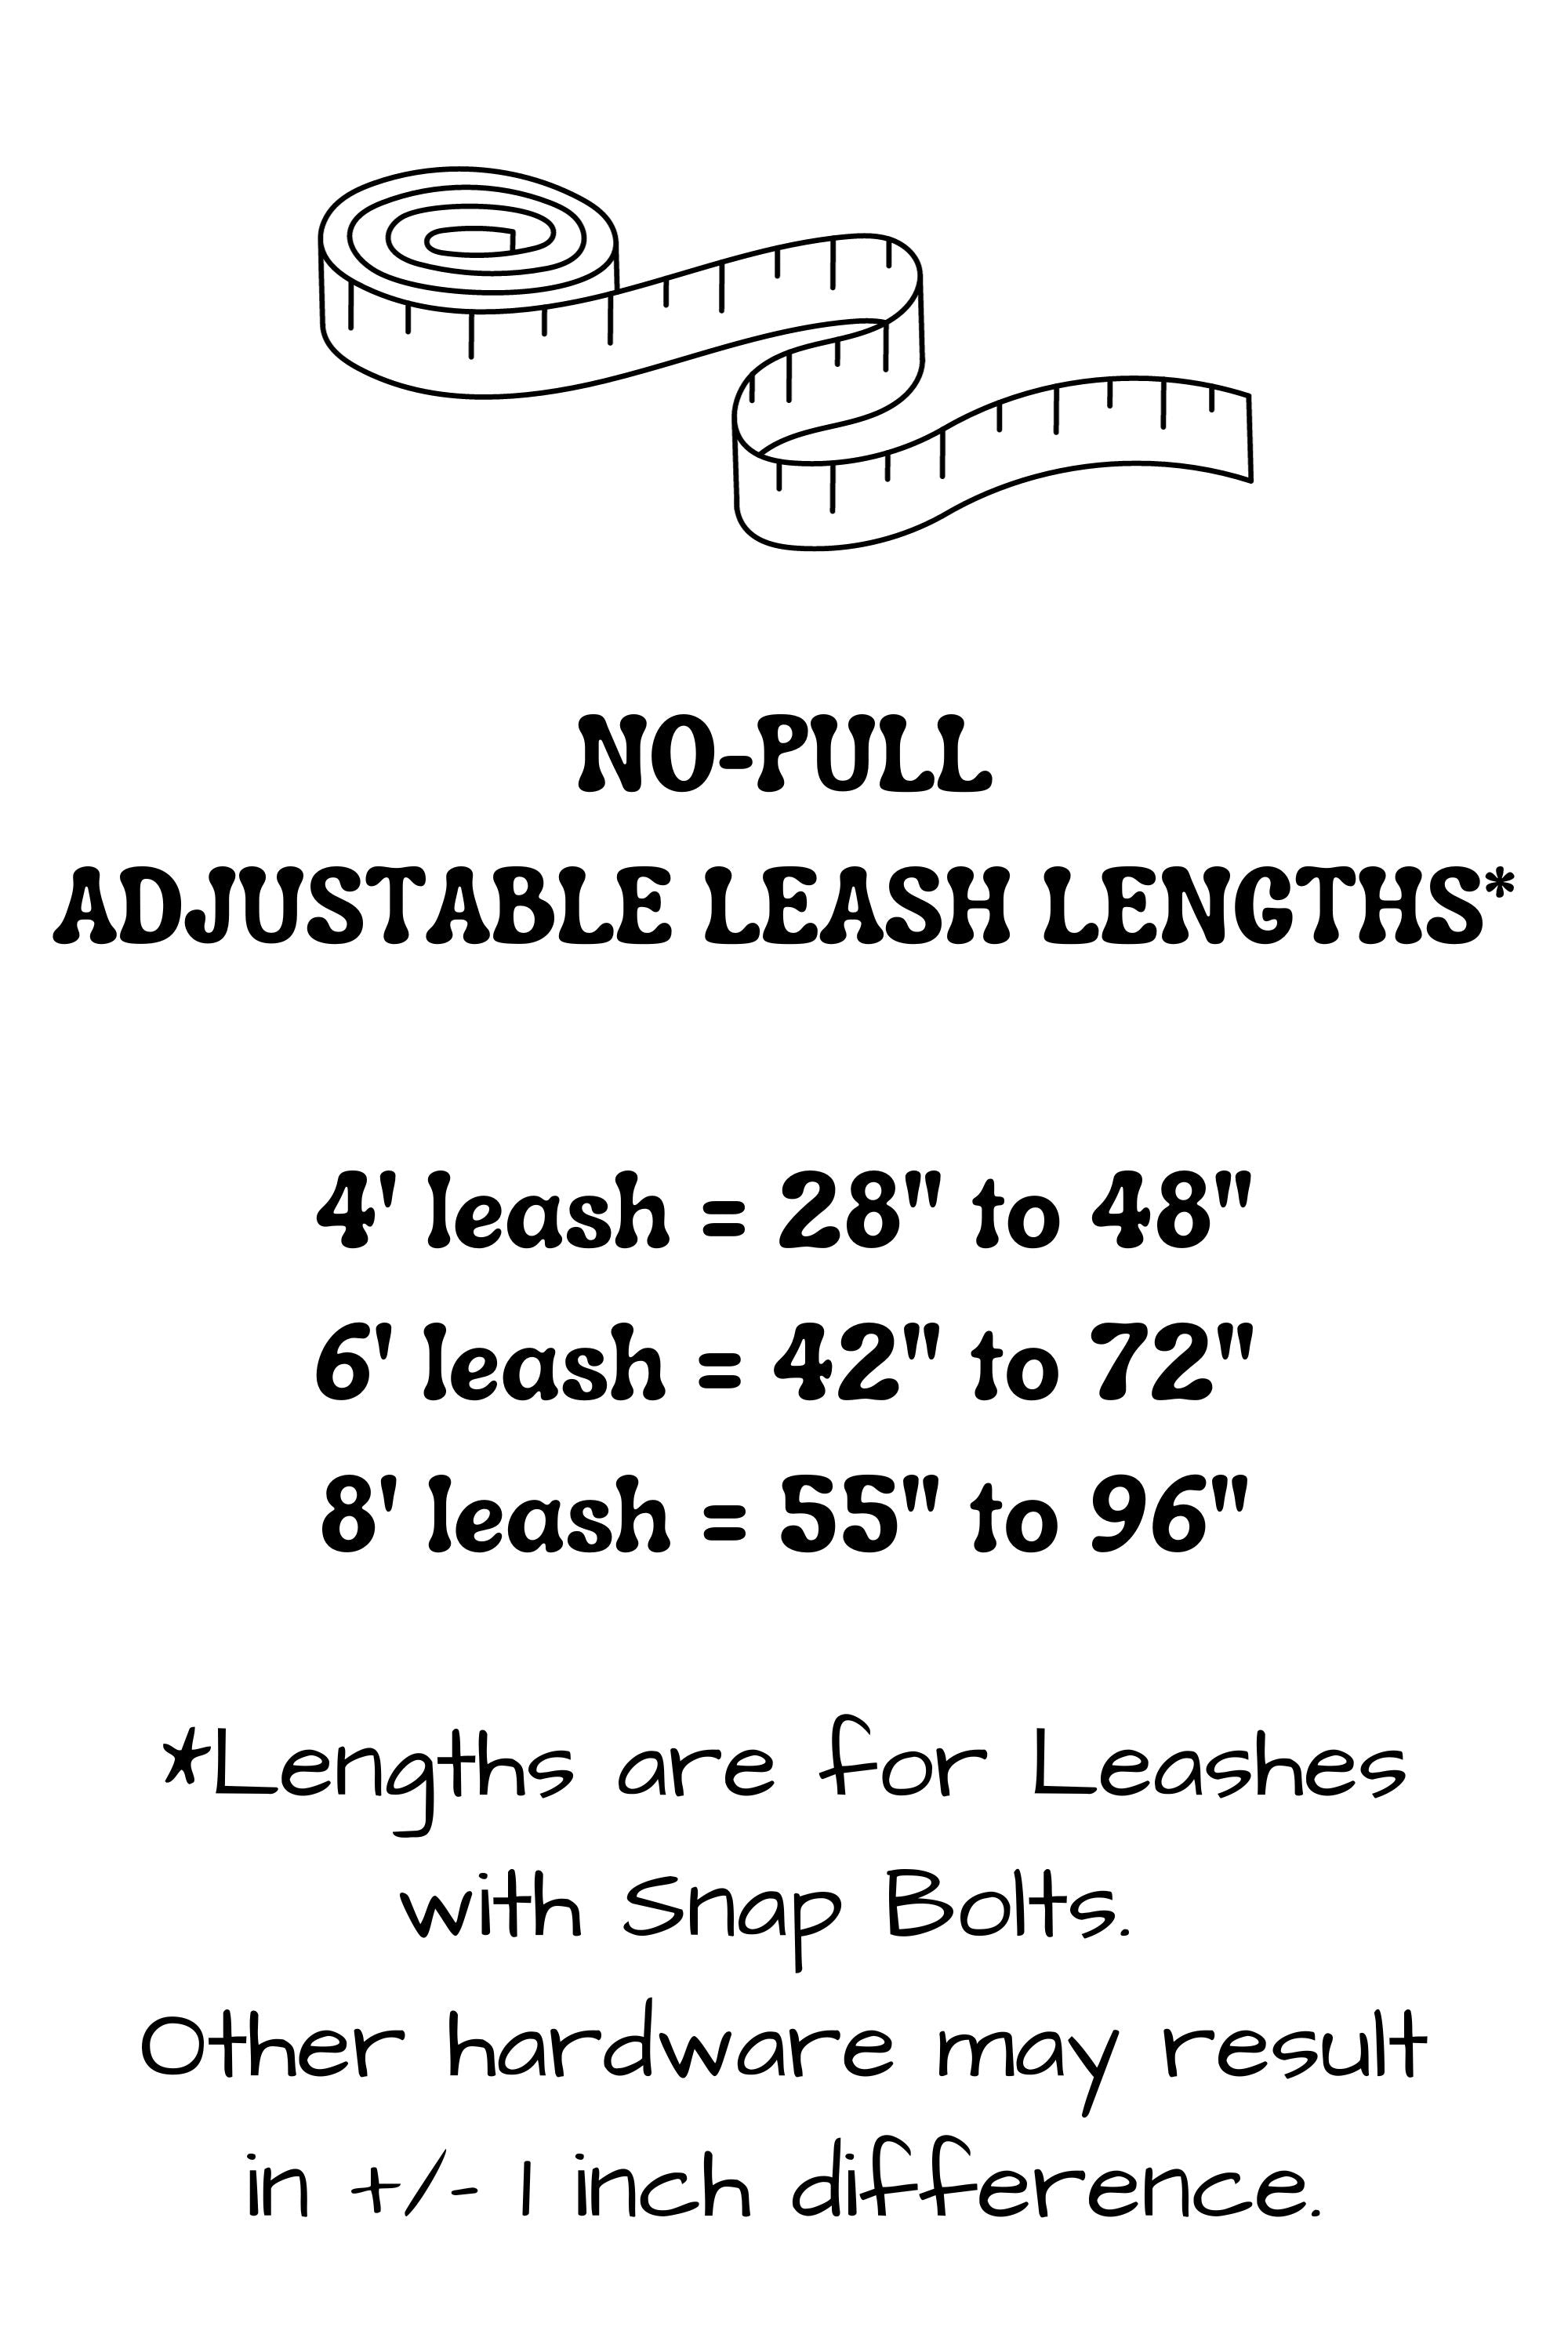 Adjustable length no-pull leash lengths provide the following adjustability: 4 foot leash adjusts from 28 inches to 48 inches, 6 foot leash adjusts from 42 inches to 72 inches, and the 8 foot leash adjusts from 55 inches to 96 inches. Lengths stated may vary slightly with selection of hardware.